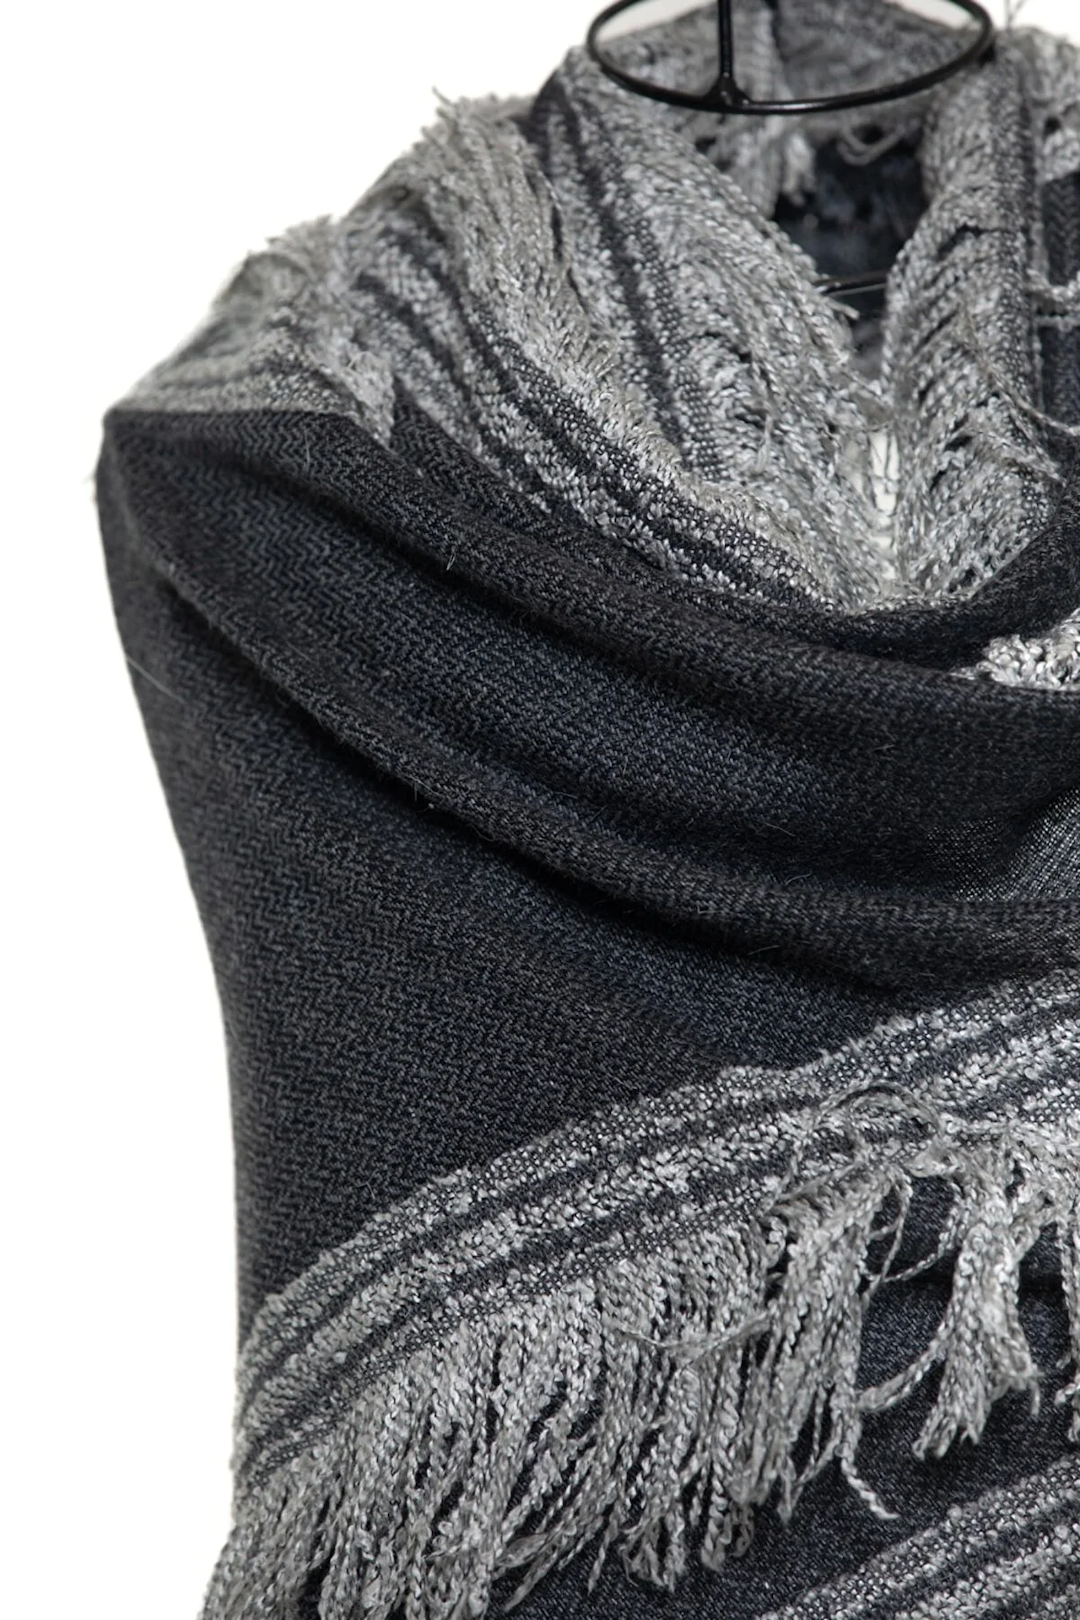 Boil Wool Scarf with Fringes - Black